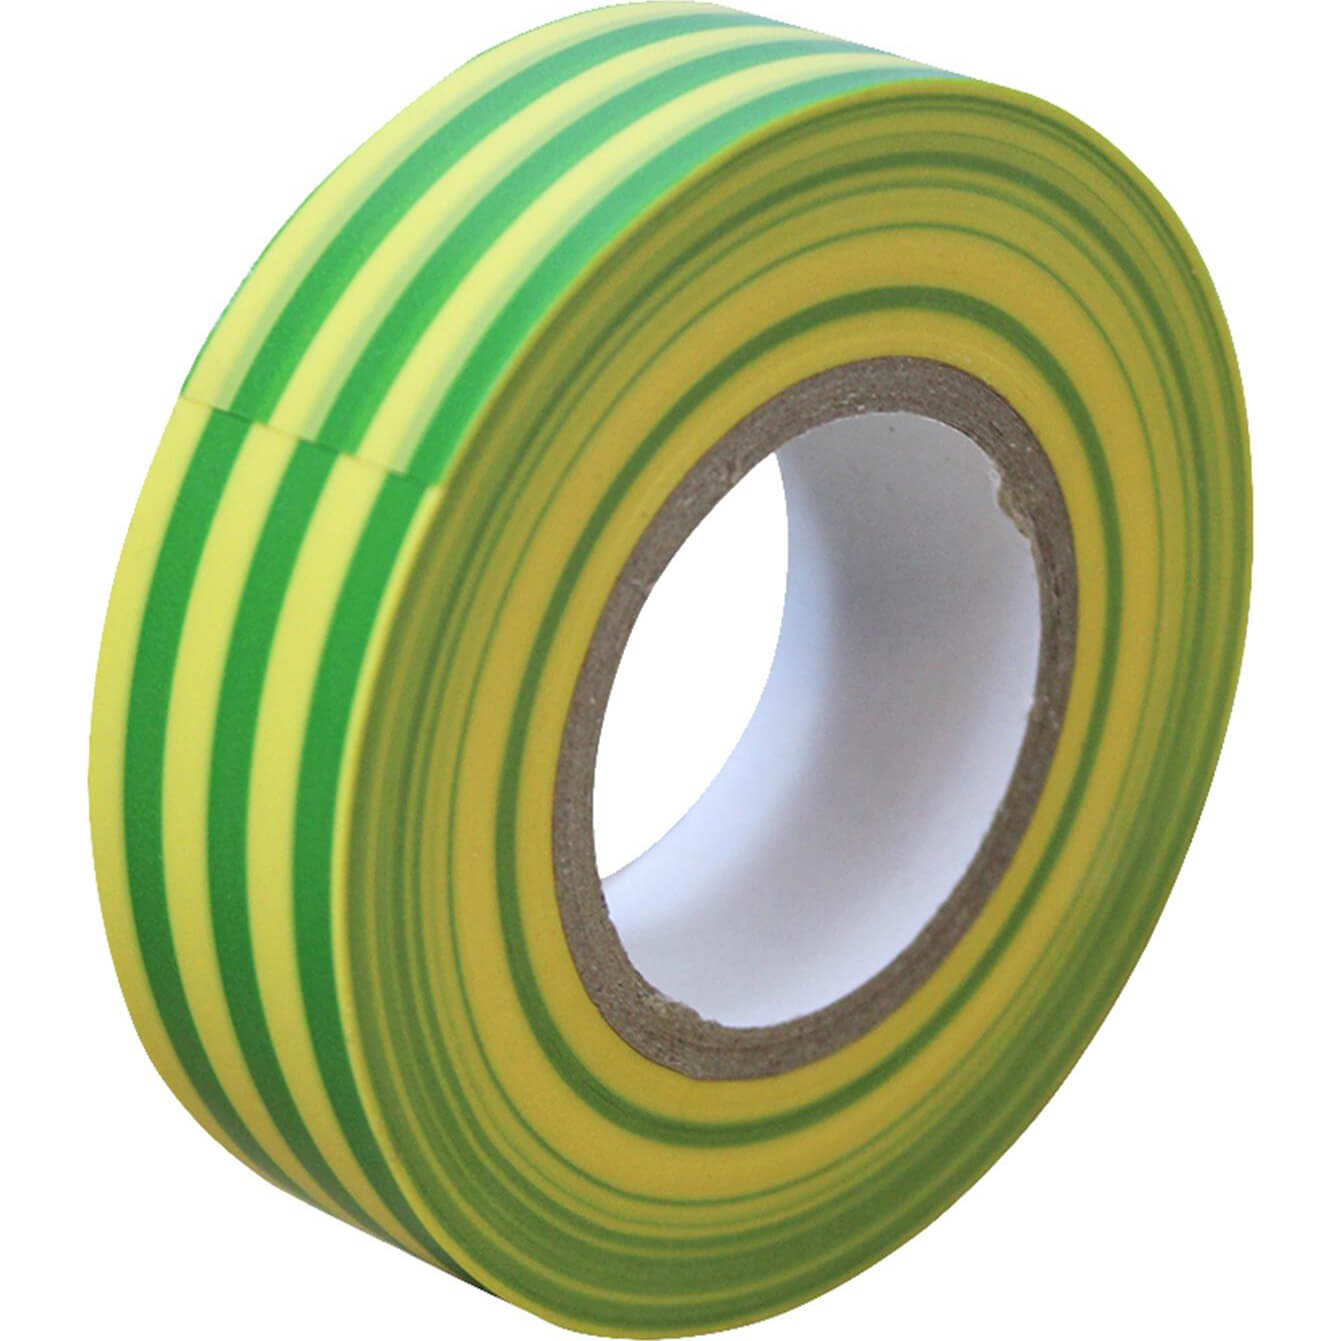 Image of Faithfull PVC Electricial Tape Yellow / Green 19mm 20m